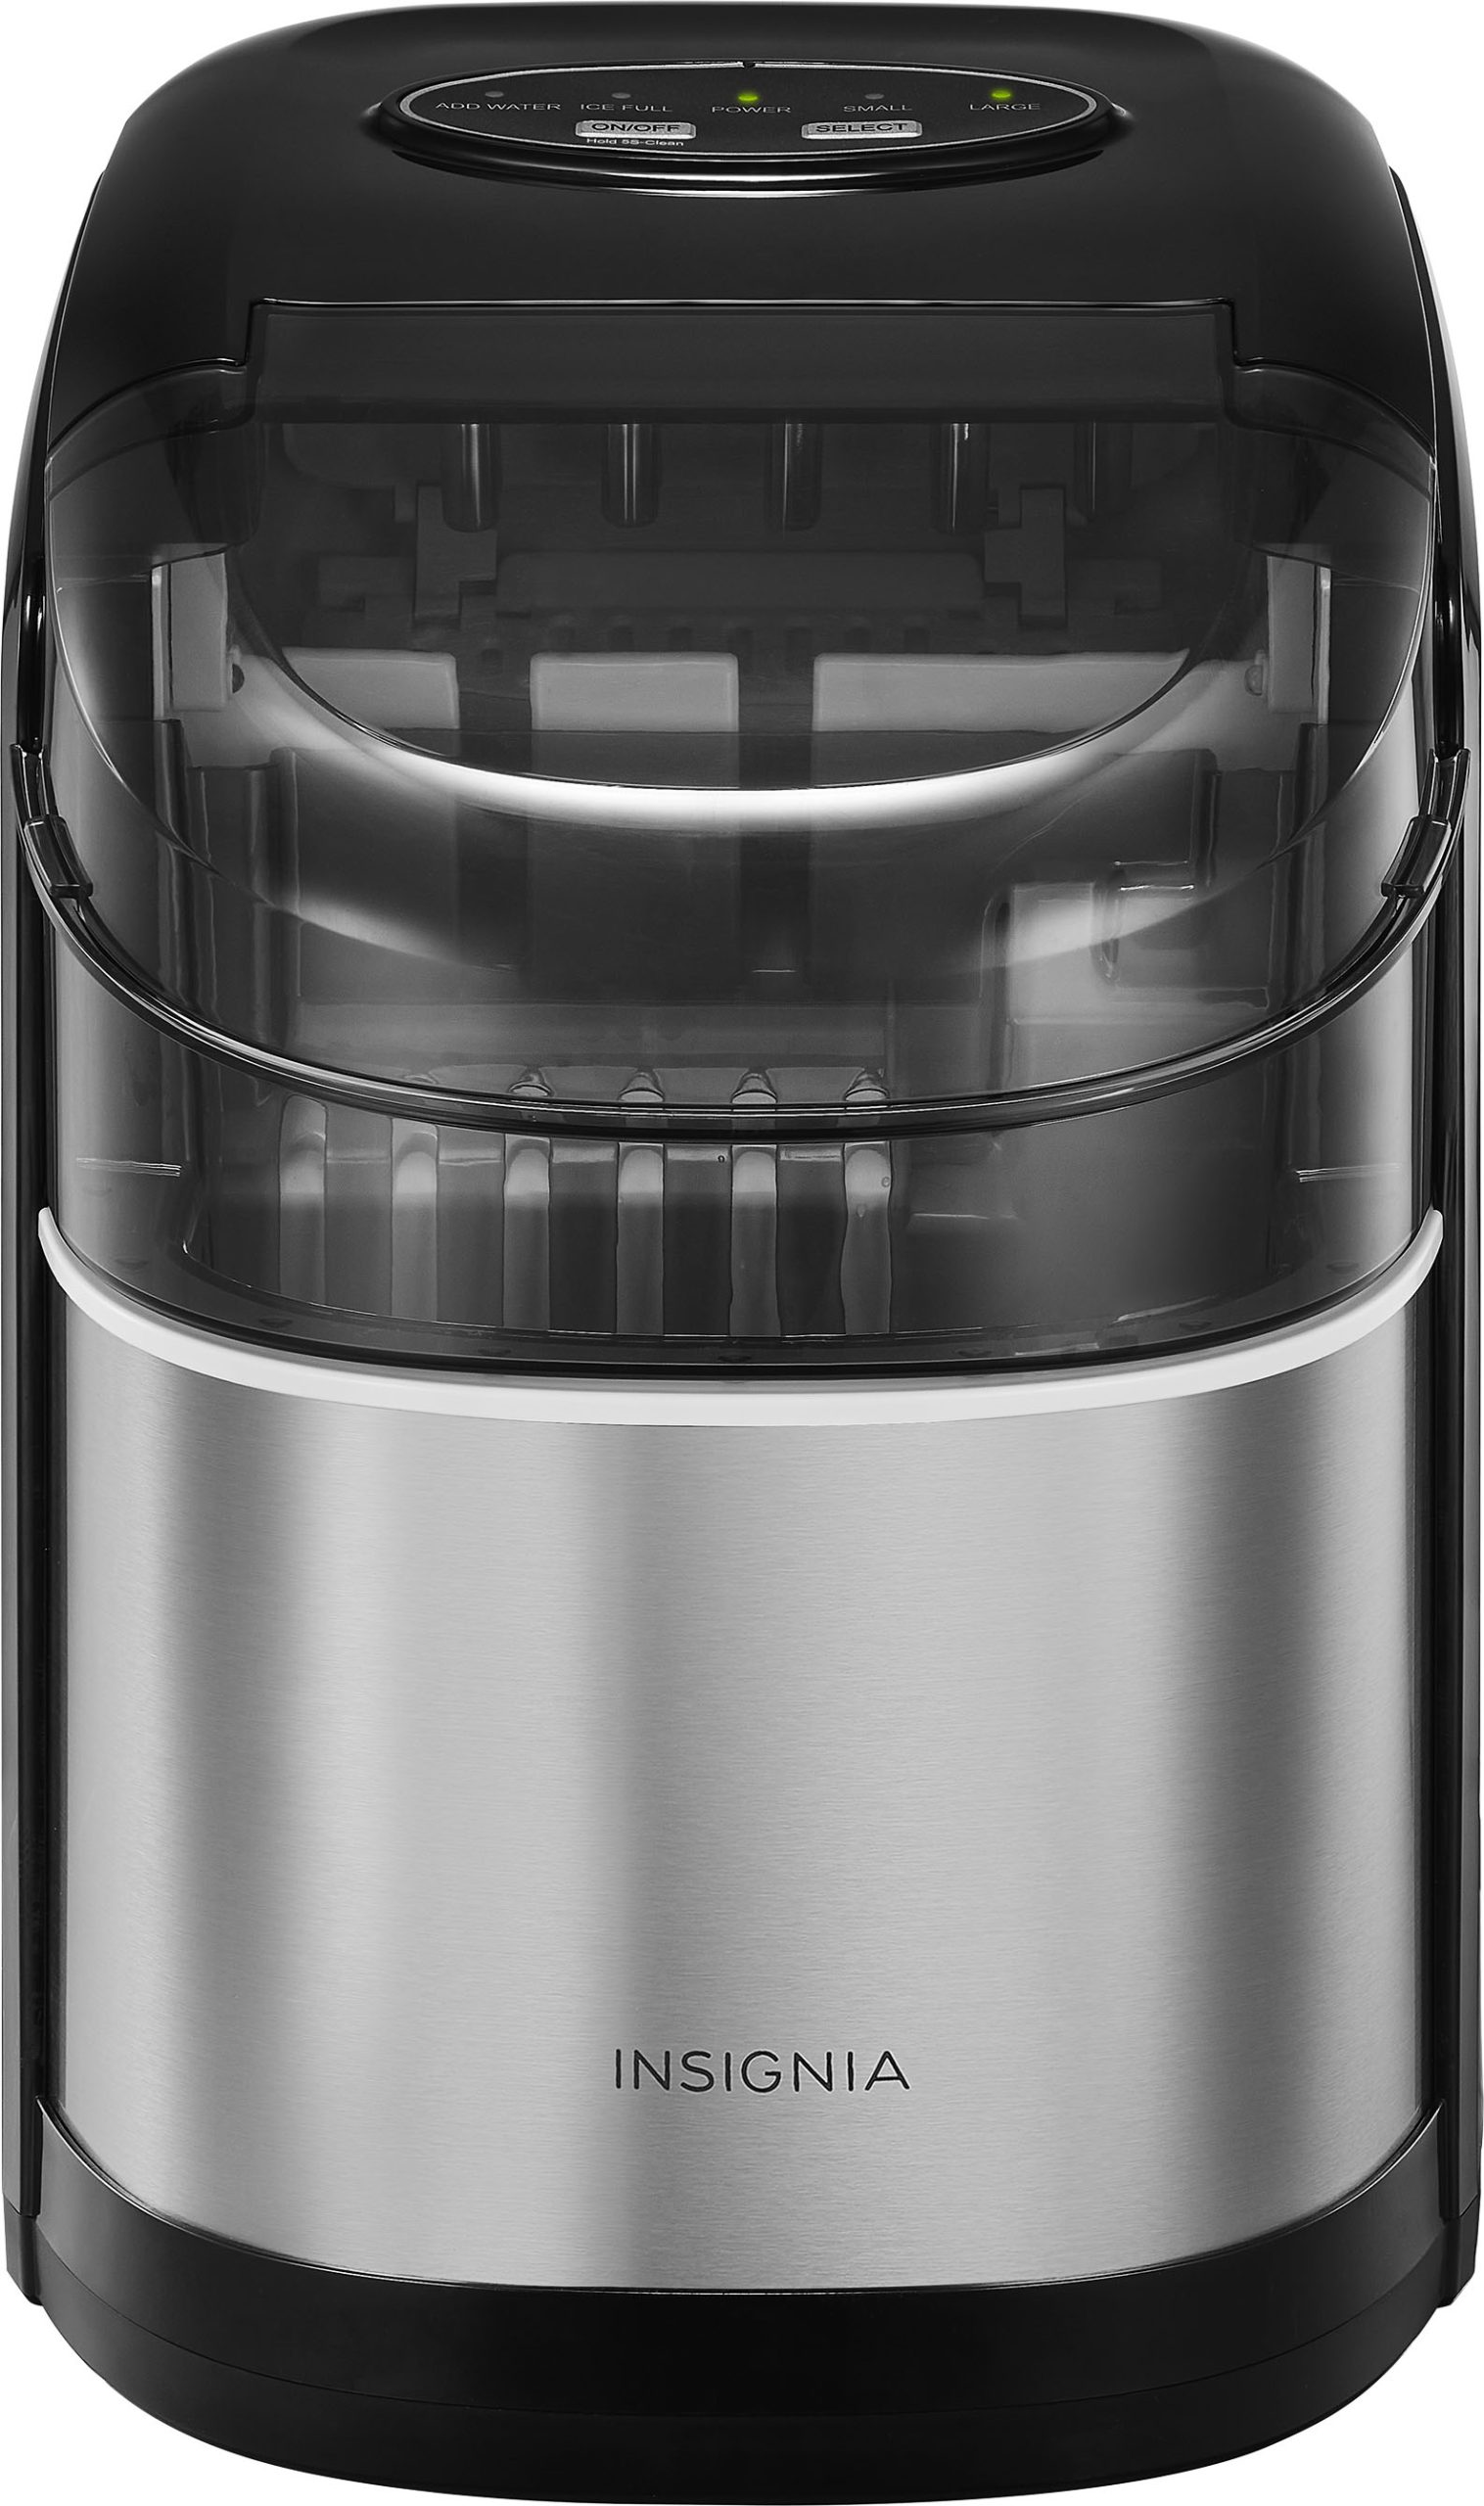 Insignia™ – Portable Icemaker 33 lb. With Auto Shut-Off – Stainless steel – Just $149.99 at Best Buy